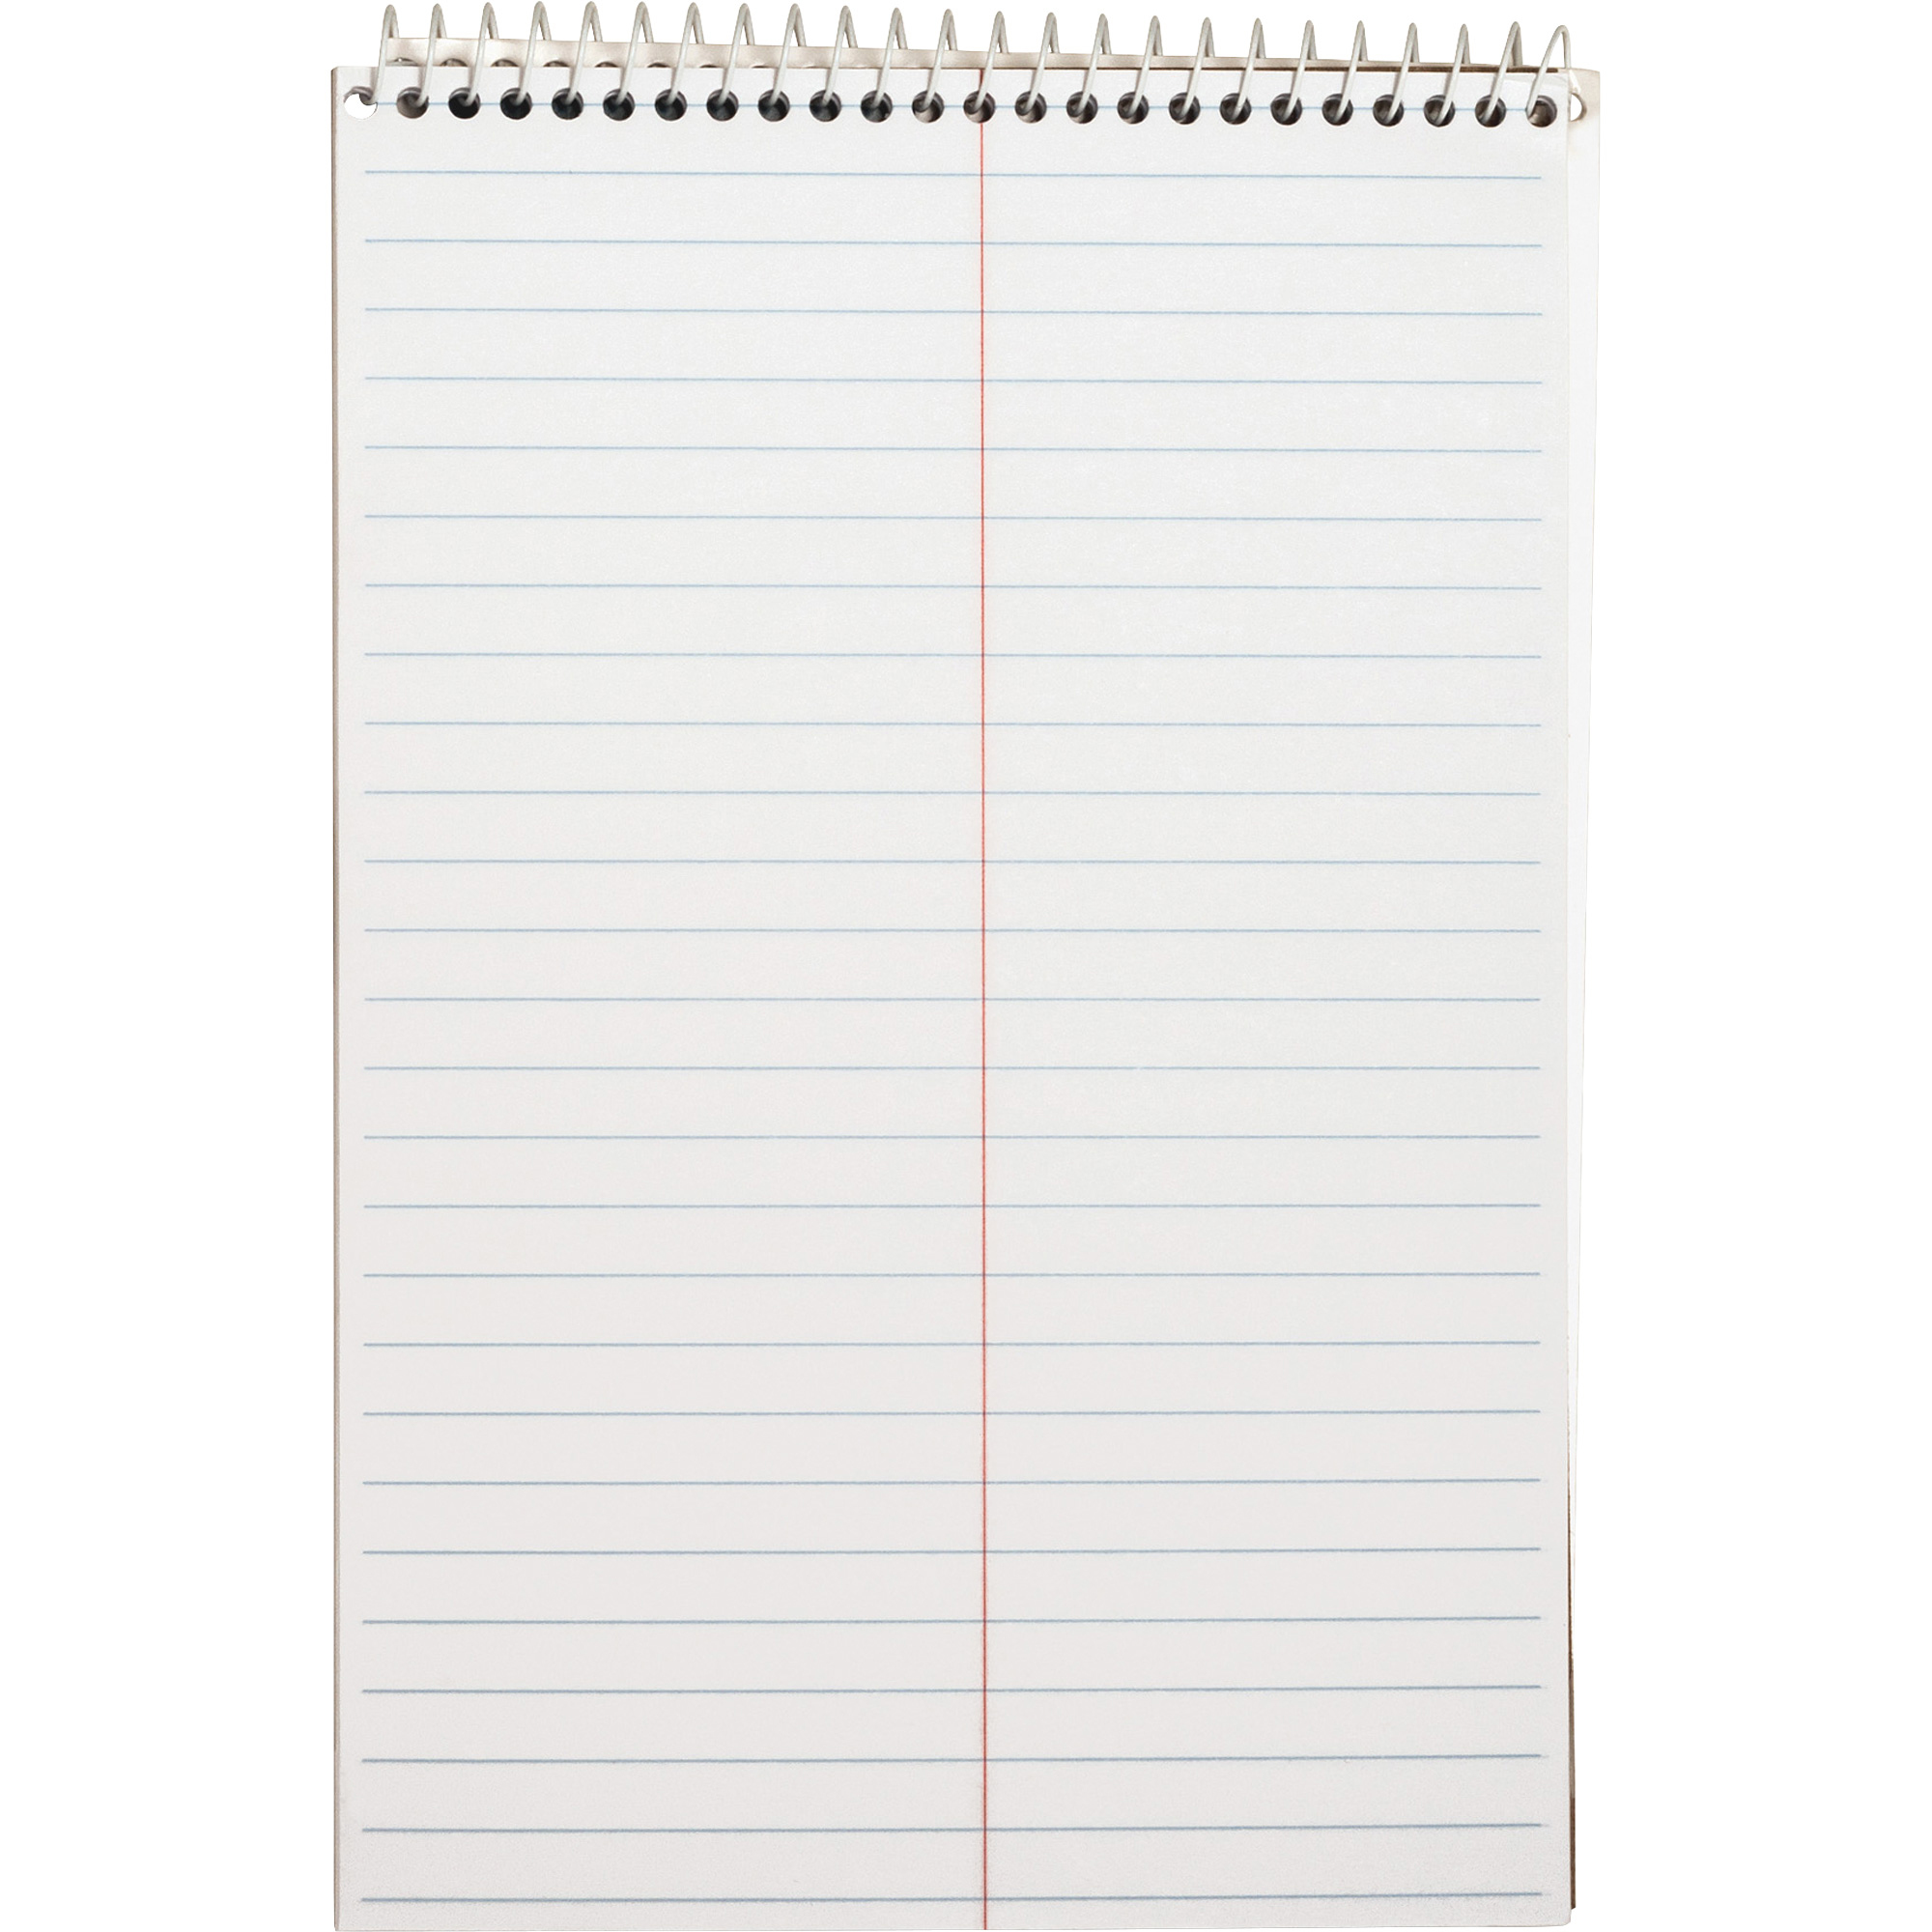 939888-1 Steno Note Pad: 6 in x 9 in Sheet Size, Gregg, White, 80 Sheets, Blue,  Card Stock, 12 PK